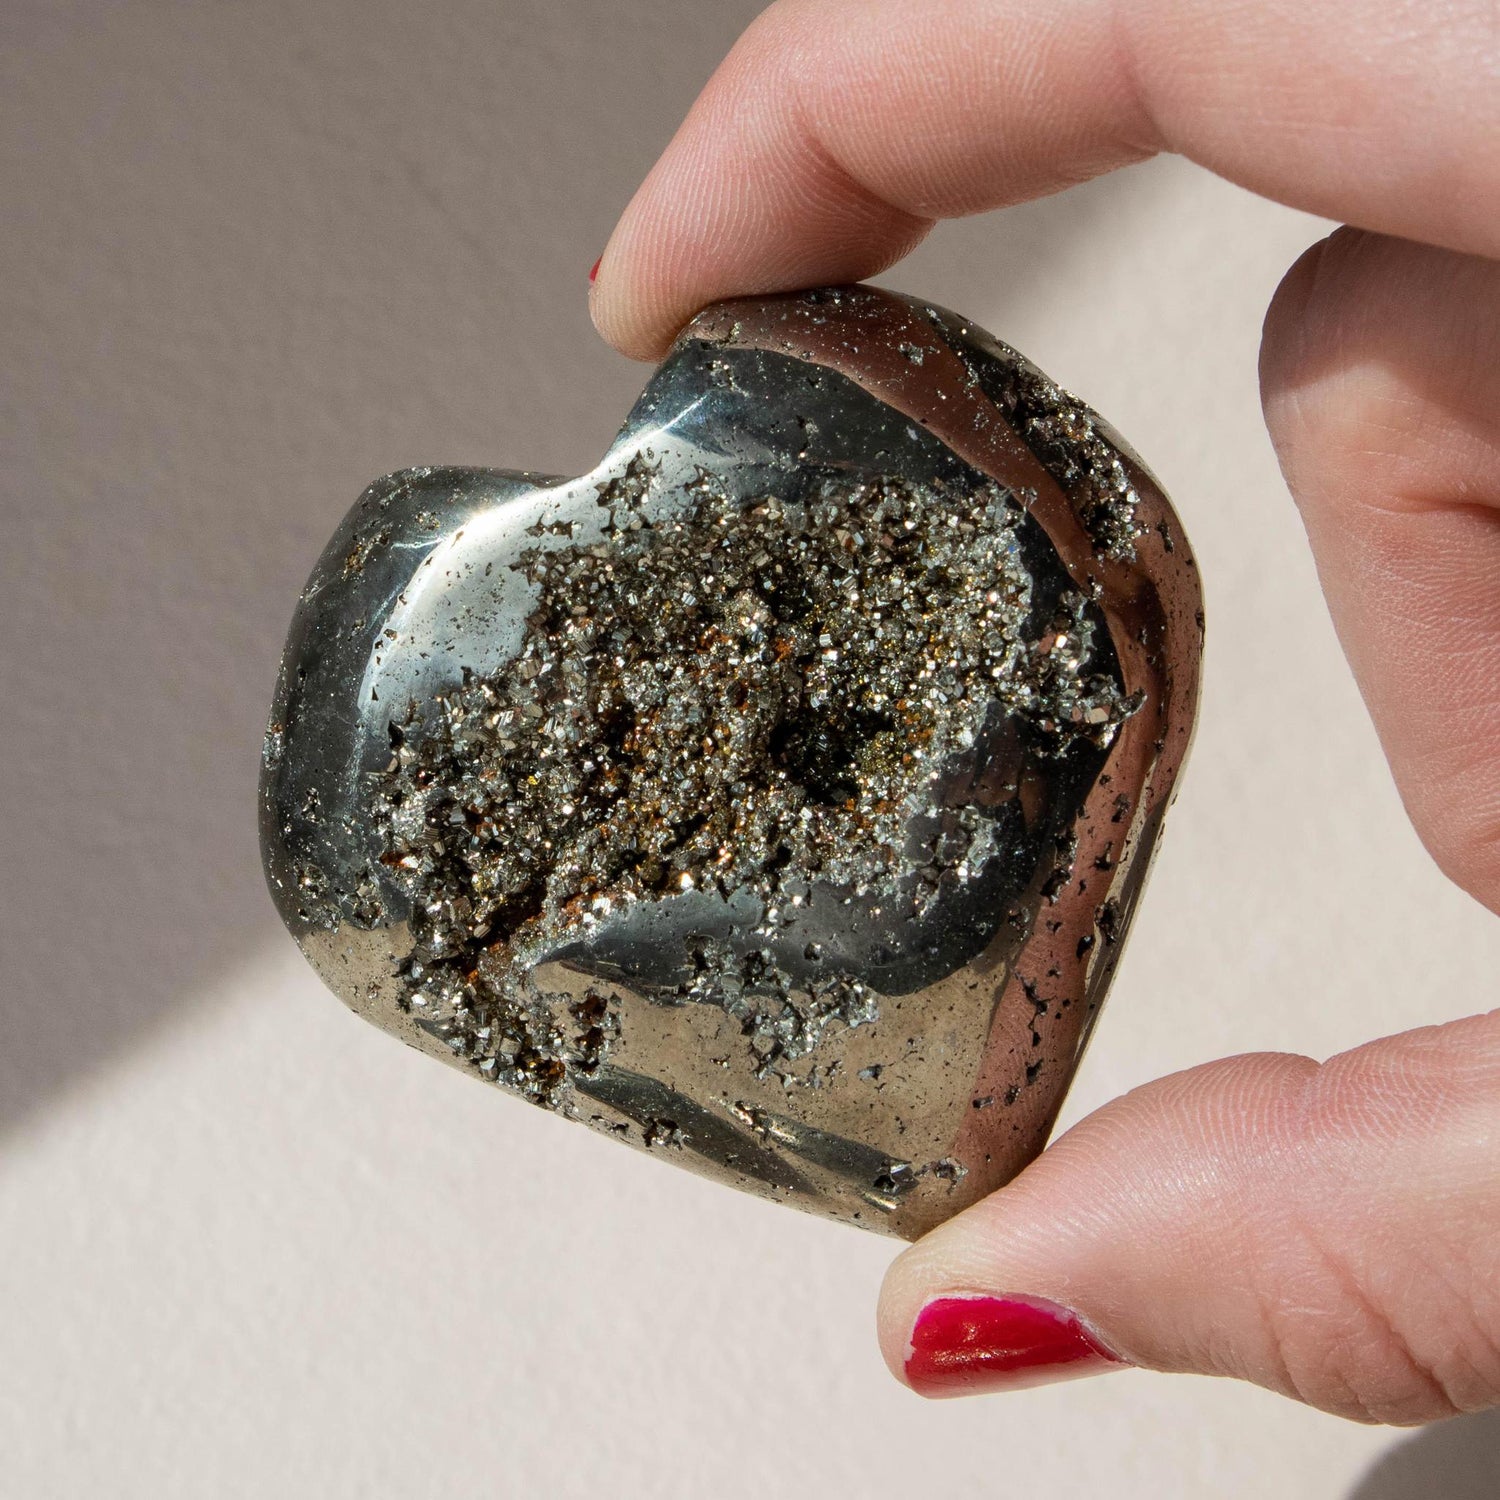 pyrite, pyrite heart, crystal heart, pyrite crystal, pyrite stone, pyrite properties, pyrite healing properties, pyrite metaphysical properties, pyrite meaning